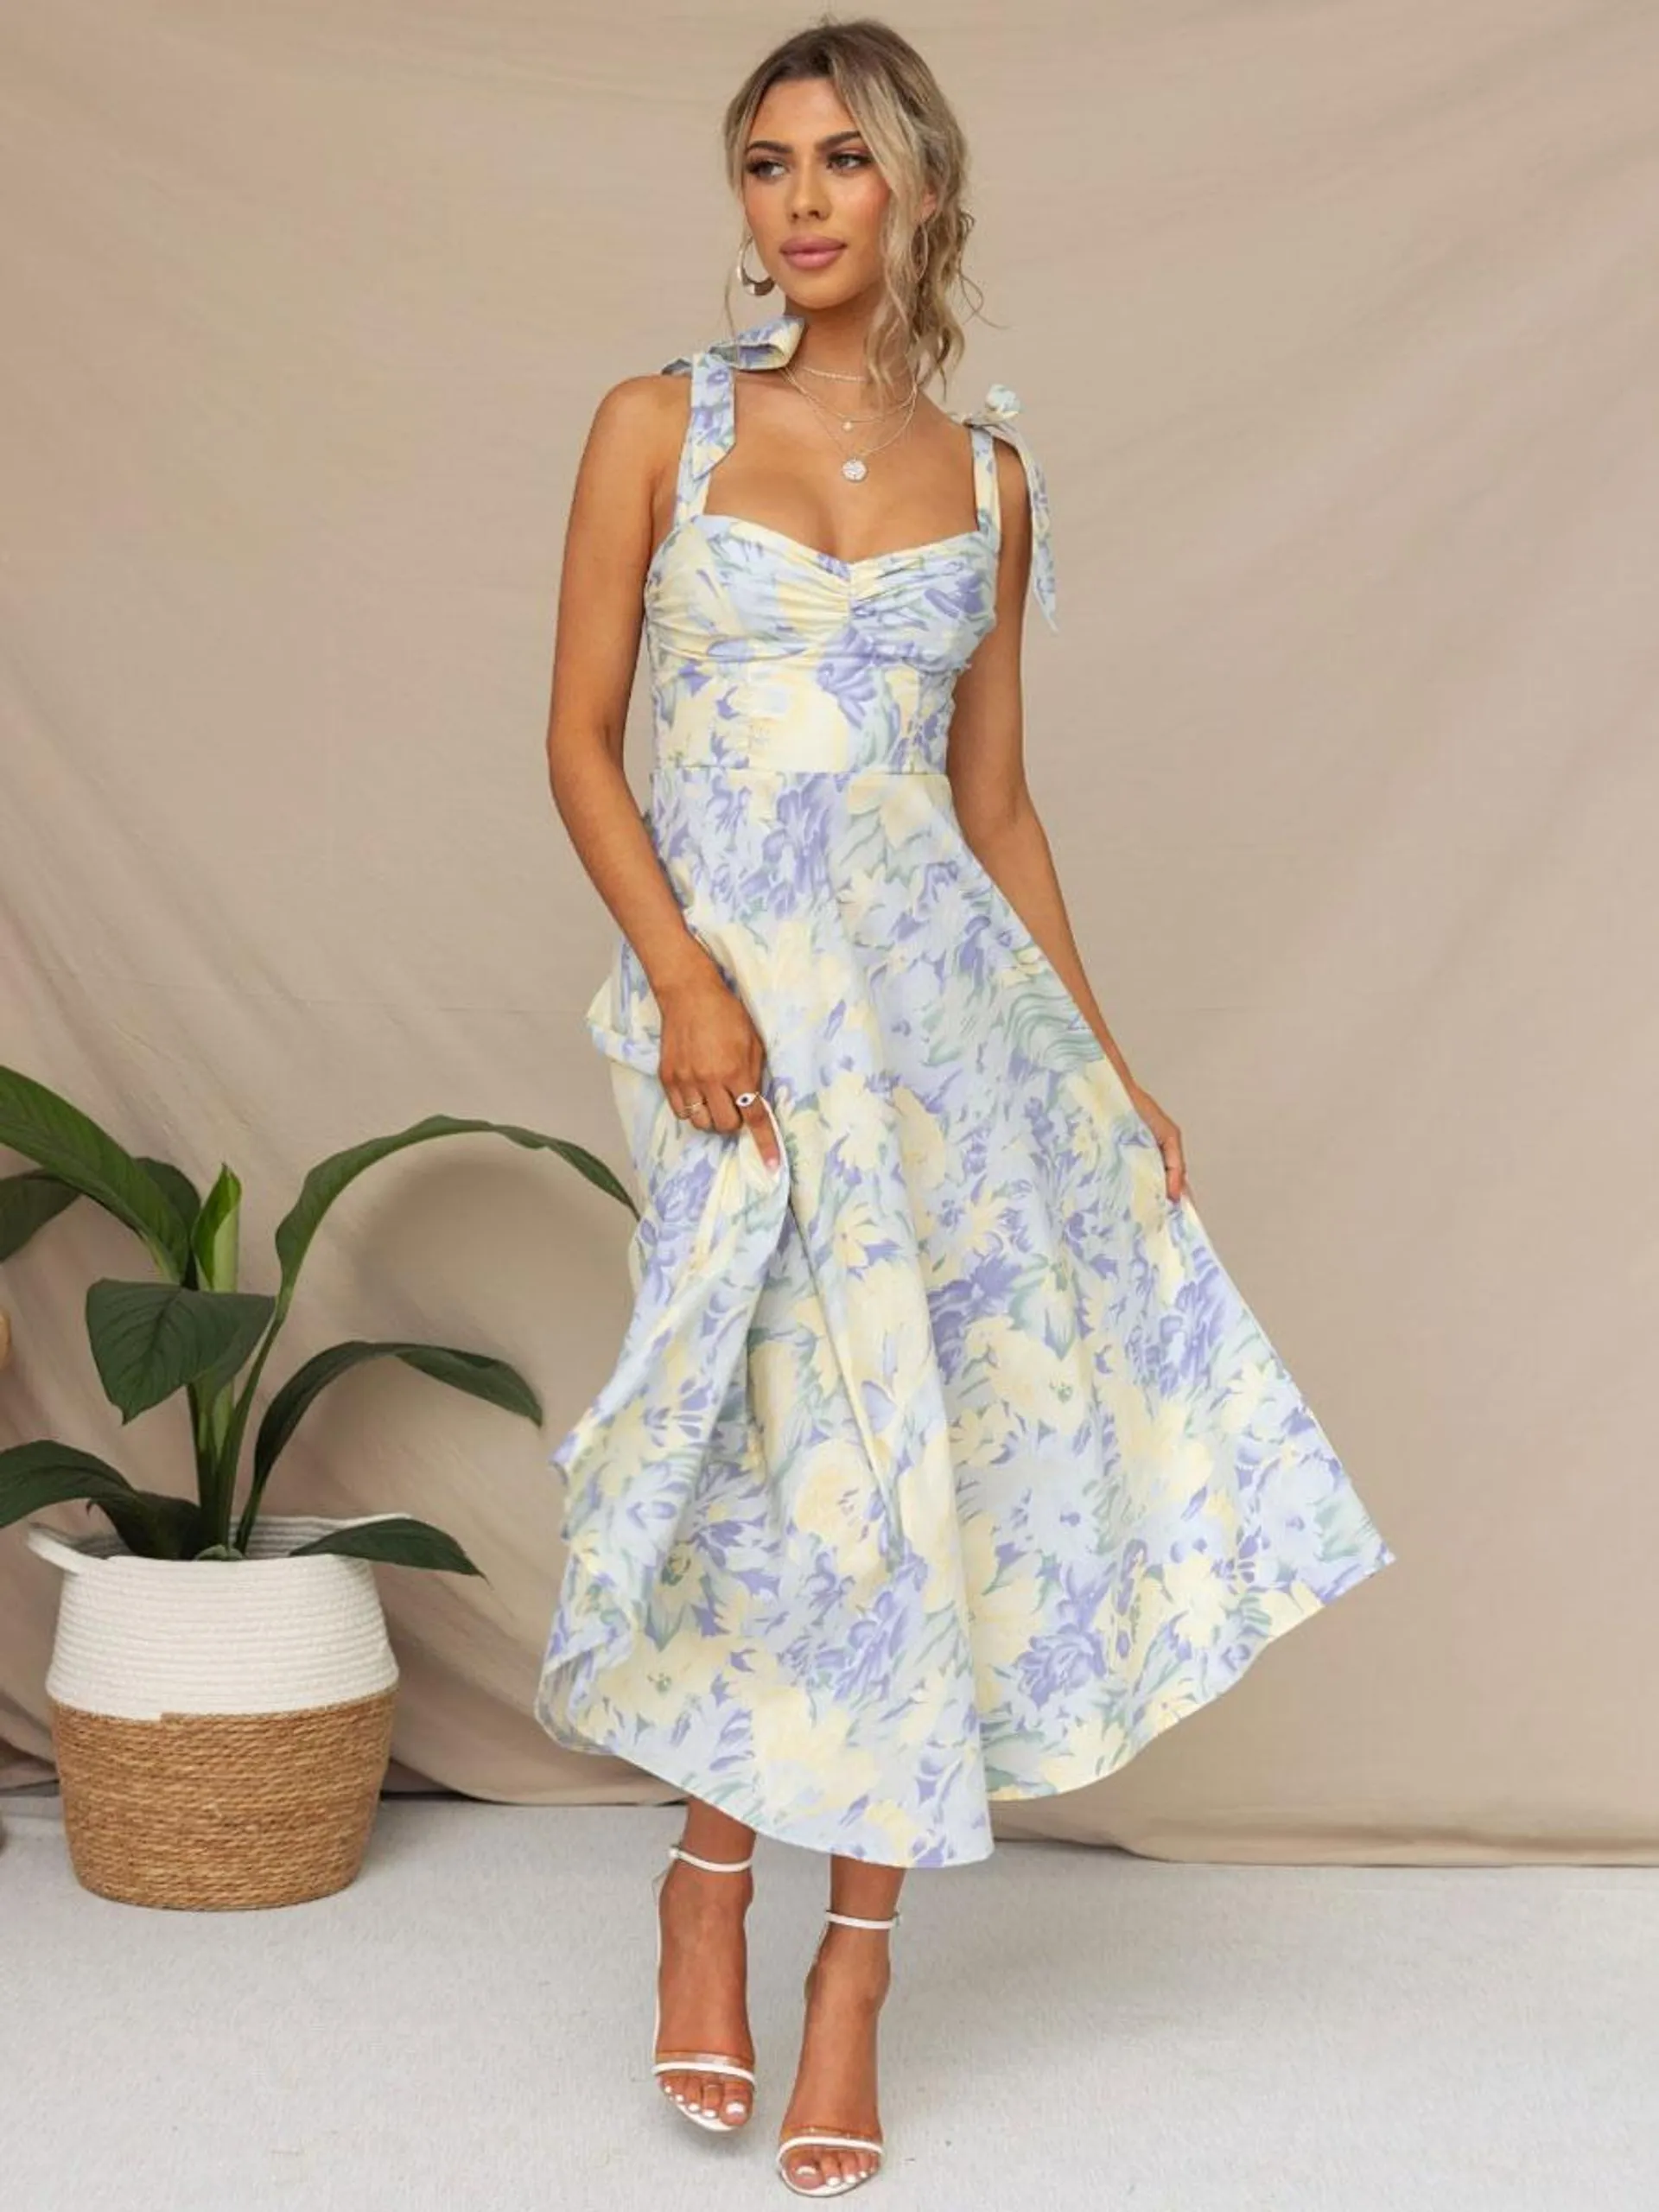 Print Dresses Midi Dress Floral Print Sleeveless Sweetheart Neck Casual Lace Up Backless Summer Dresses